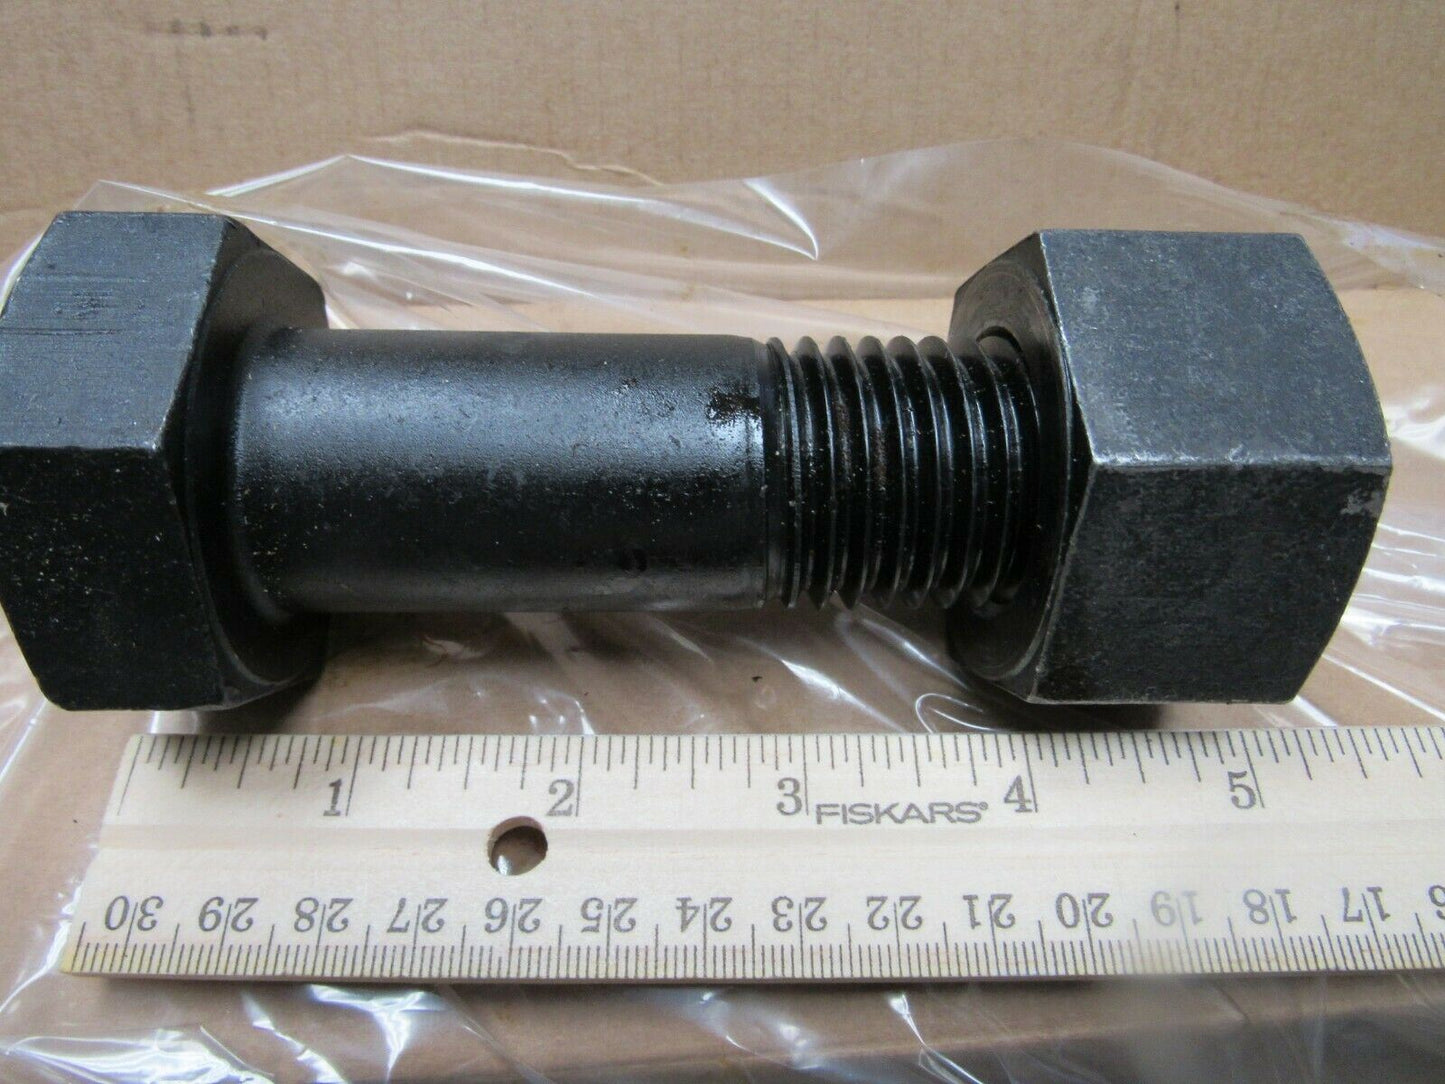 (5) 1-1/4"-7 Steel Structural Bolt with Nut, A325 Type 1, A563-C, 4-1/2"L, (184254615696-BT31)